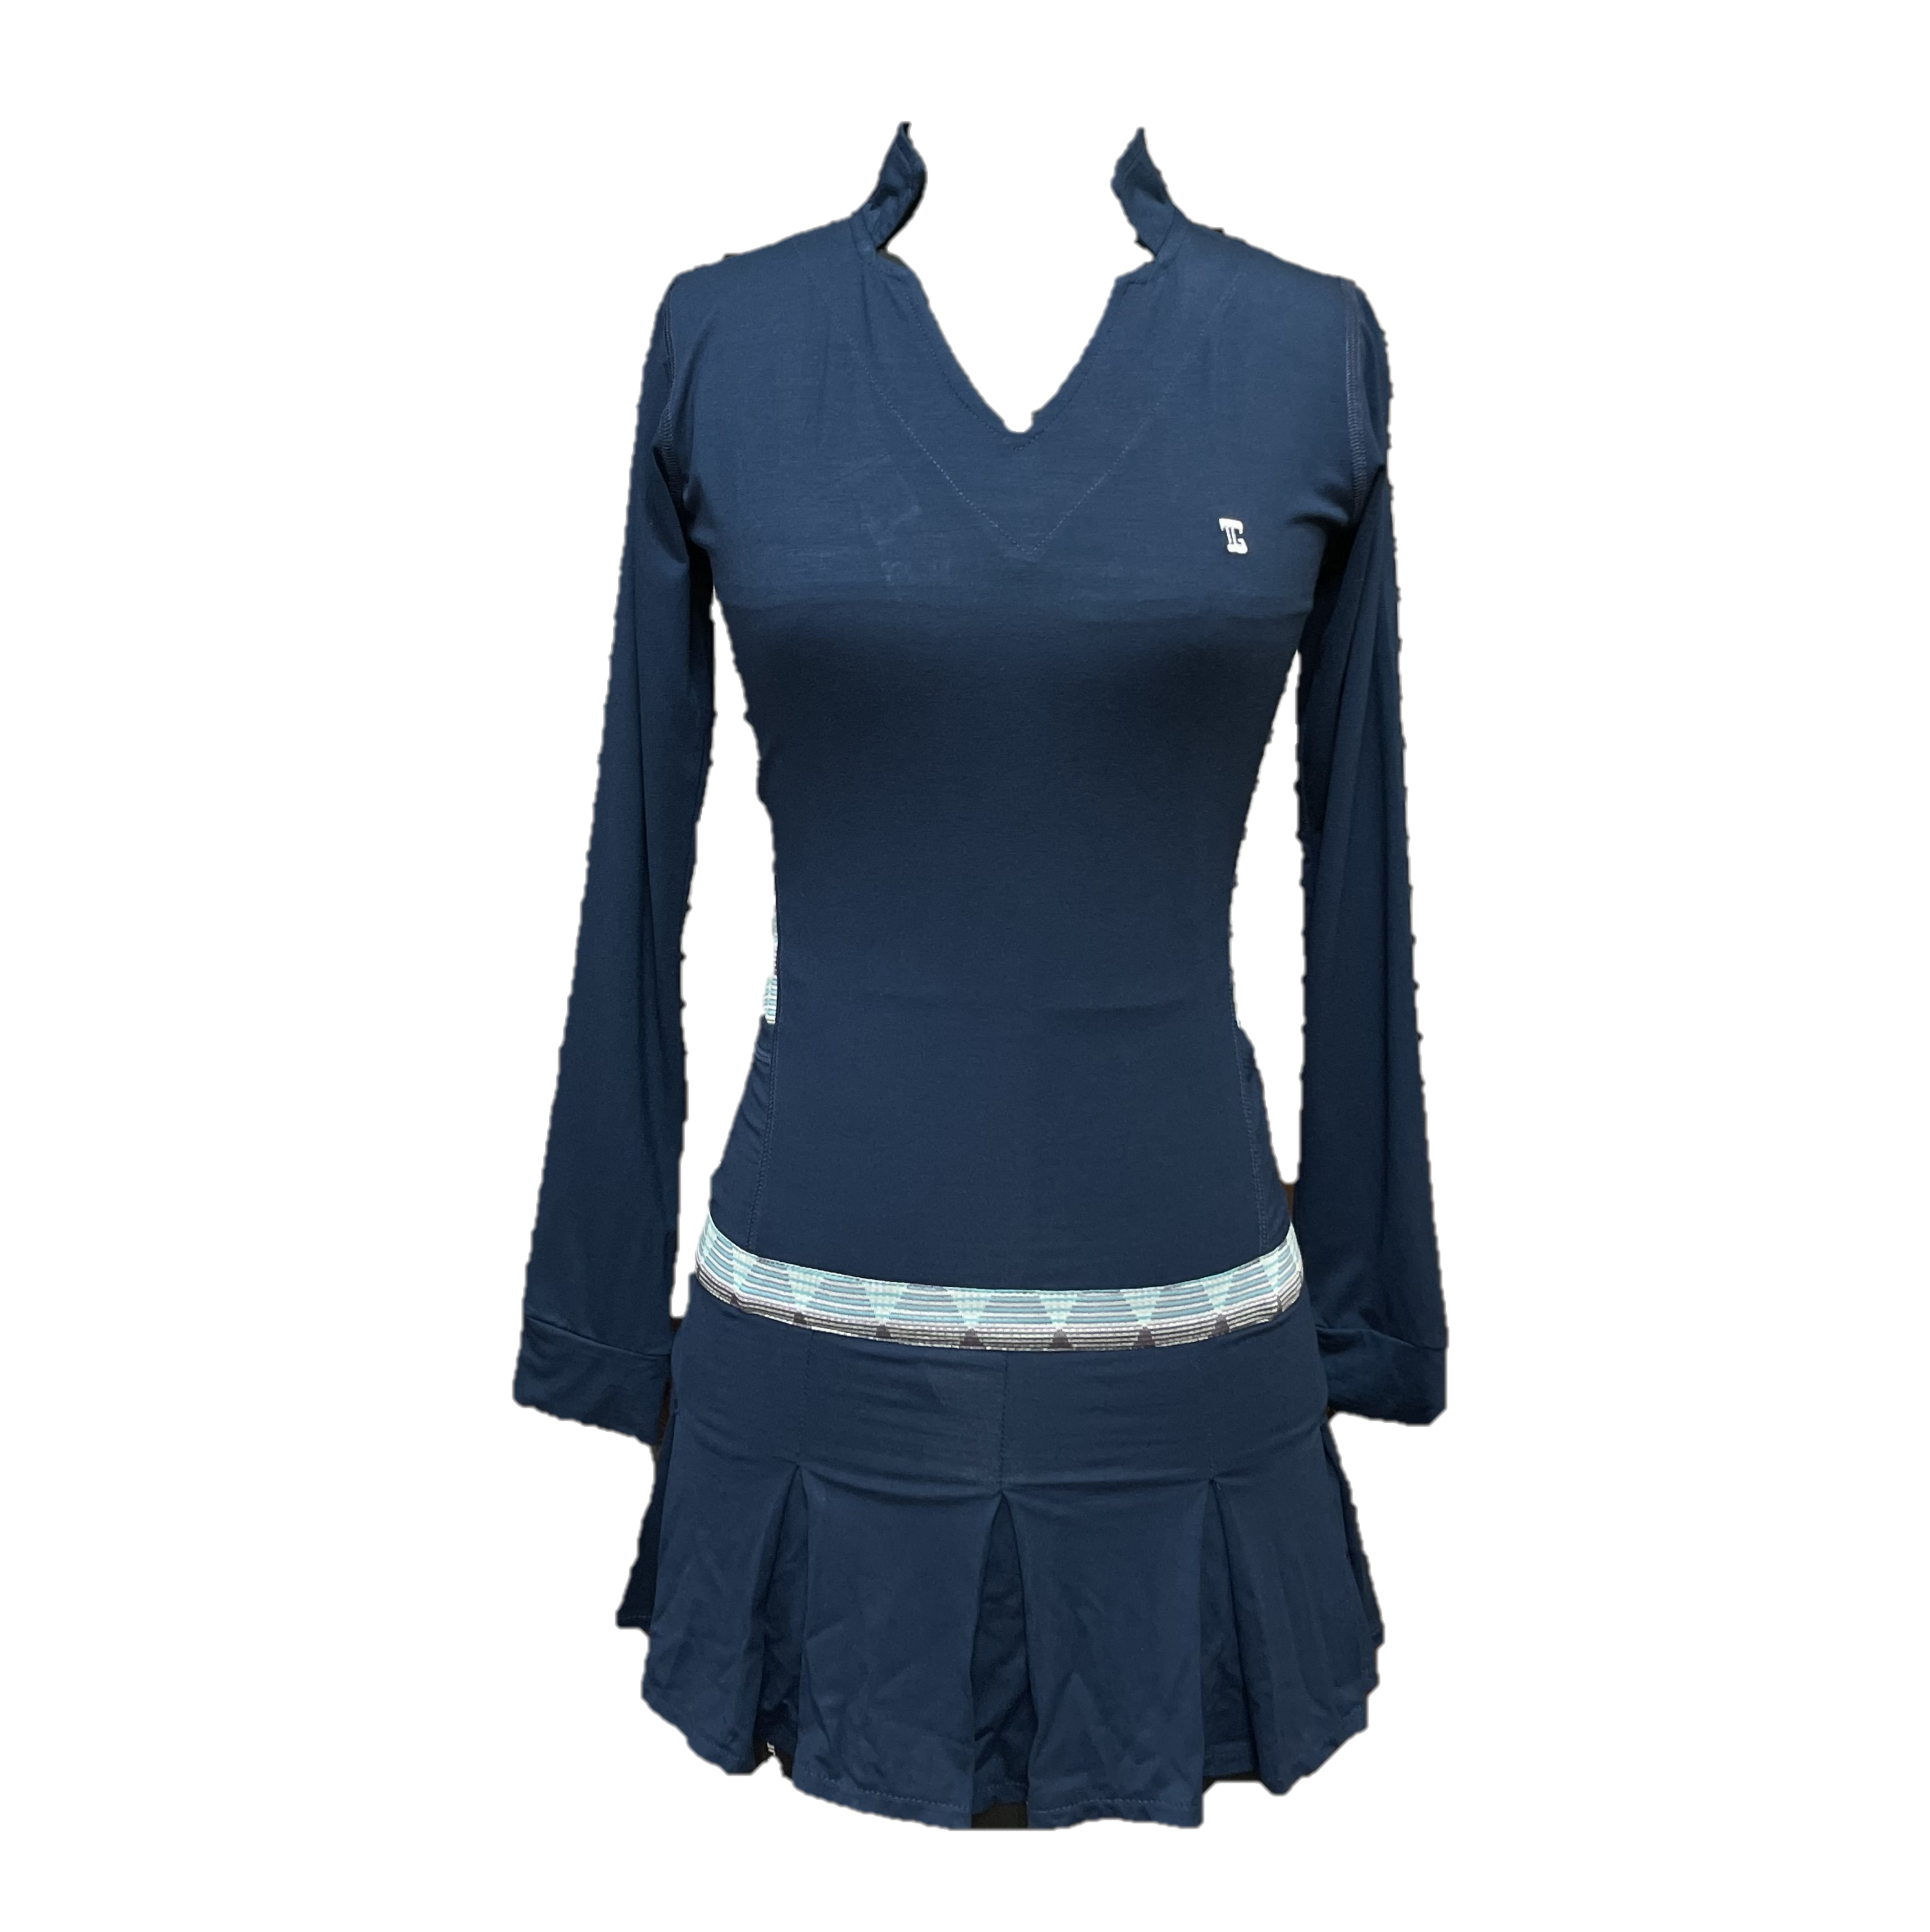 GD-027 || Golf Dress Navy, Open V Neck Mandarin Collar Pleated Swing Hem with White, Black Purple & Blue Triangle Pattern Breathable Underarm and Hip Trim, 2 Side Long Sleeve